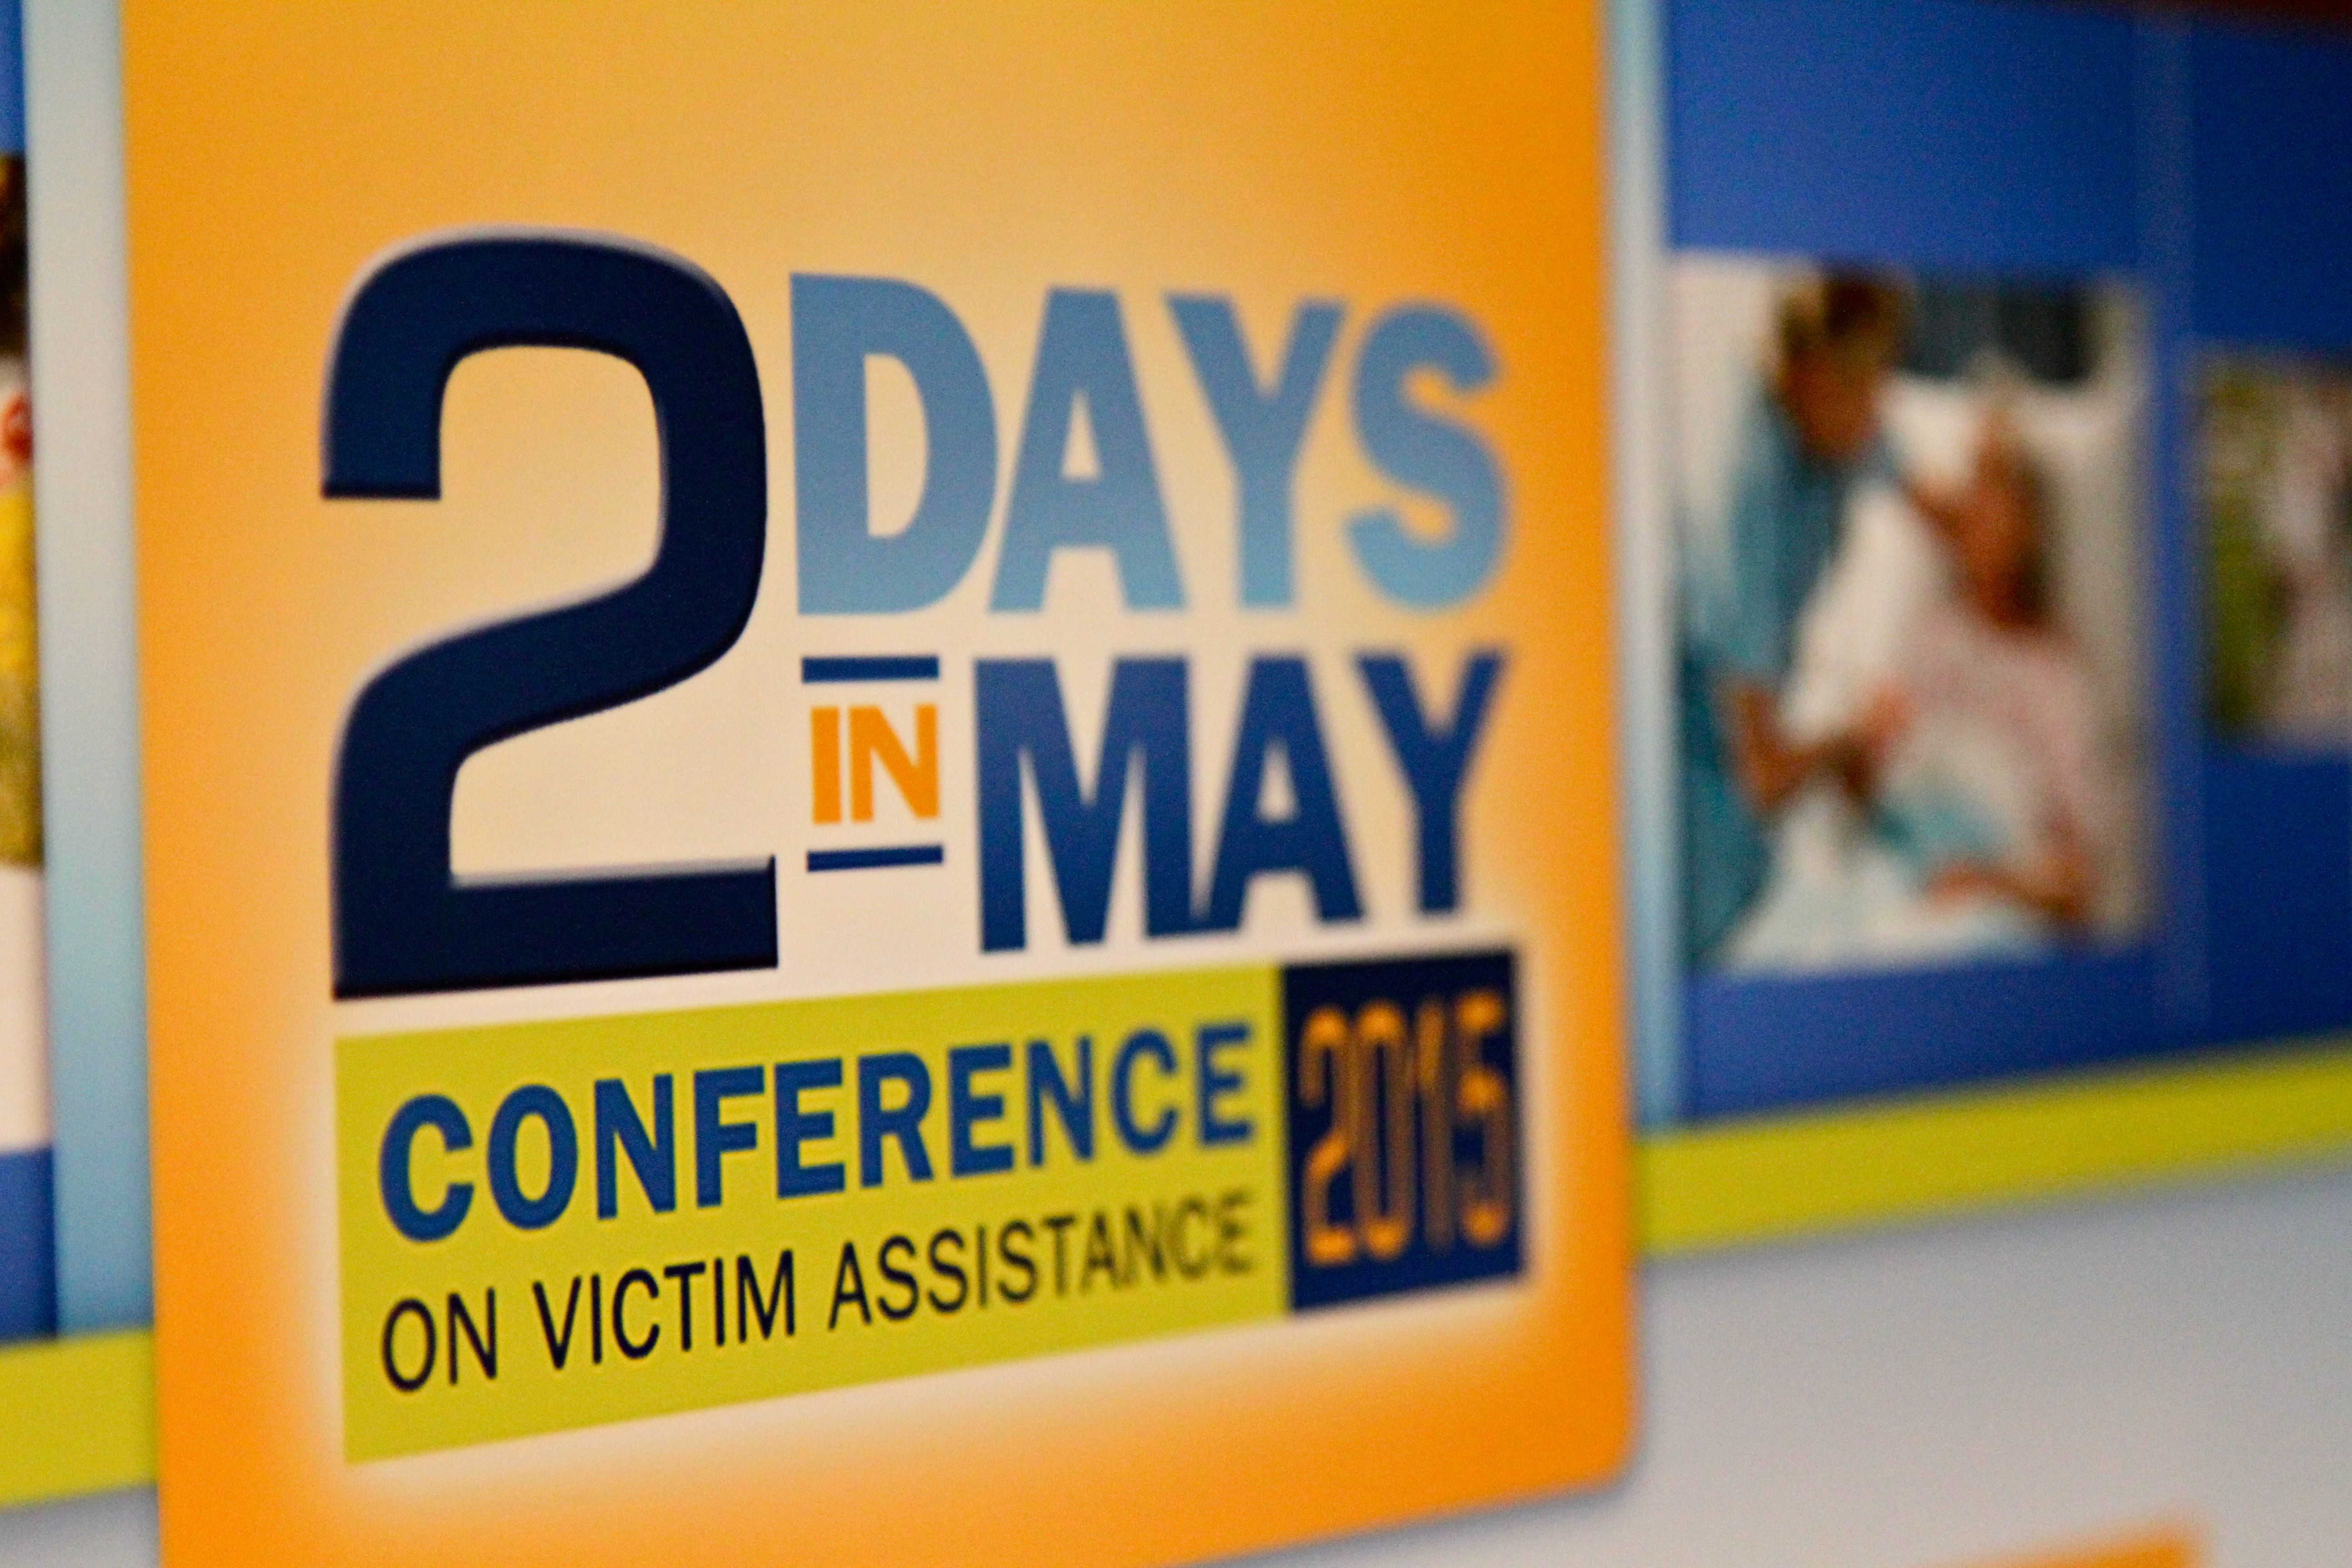 2015 Two Days in May Conference on Victim Assistance